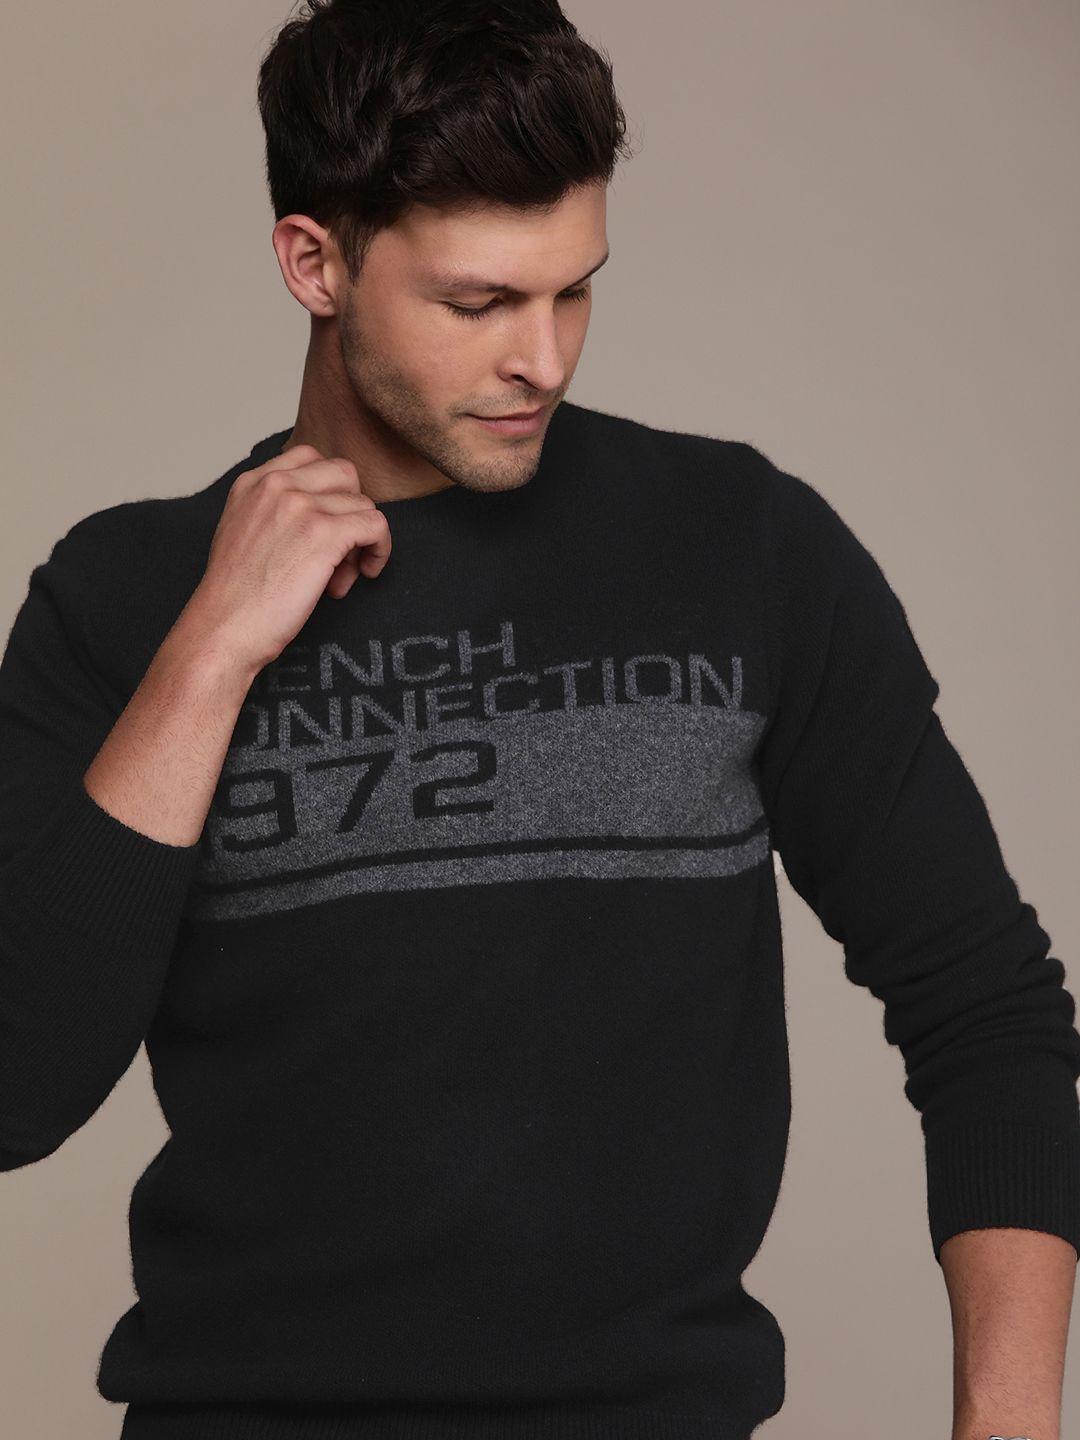 french-connection-men-brand-logo-printed-pullover